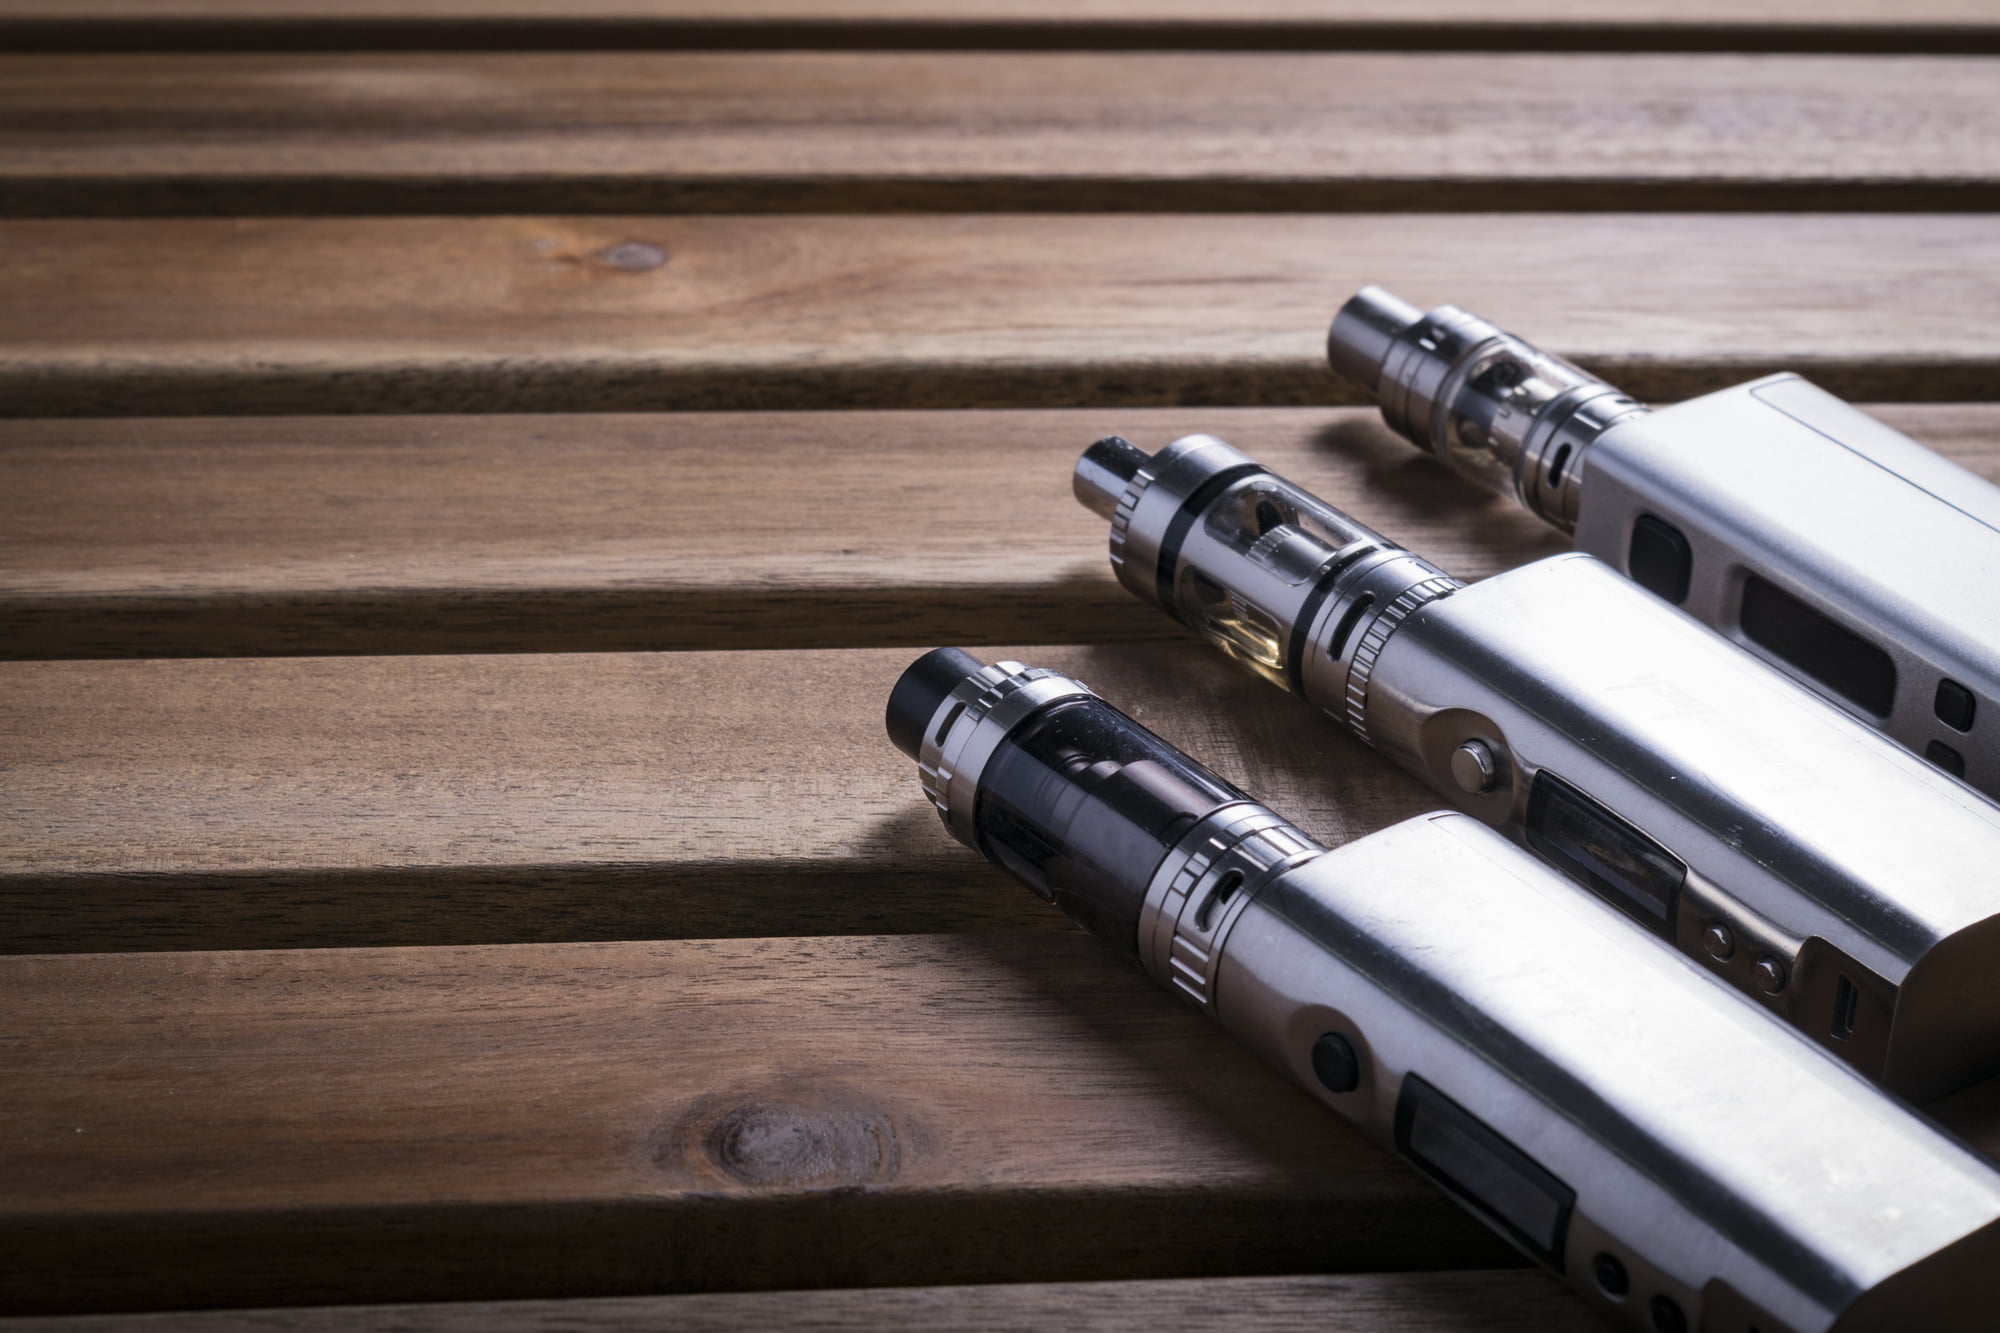 Built with high-powered battery sections, click here to explore everything you need to know about vape mods and how they work.